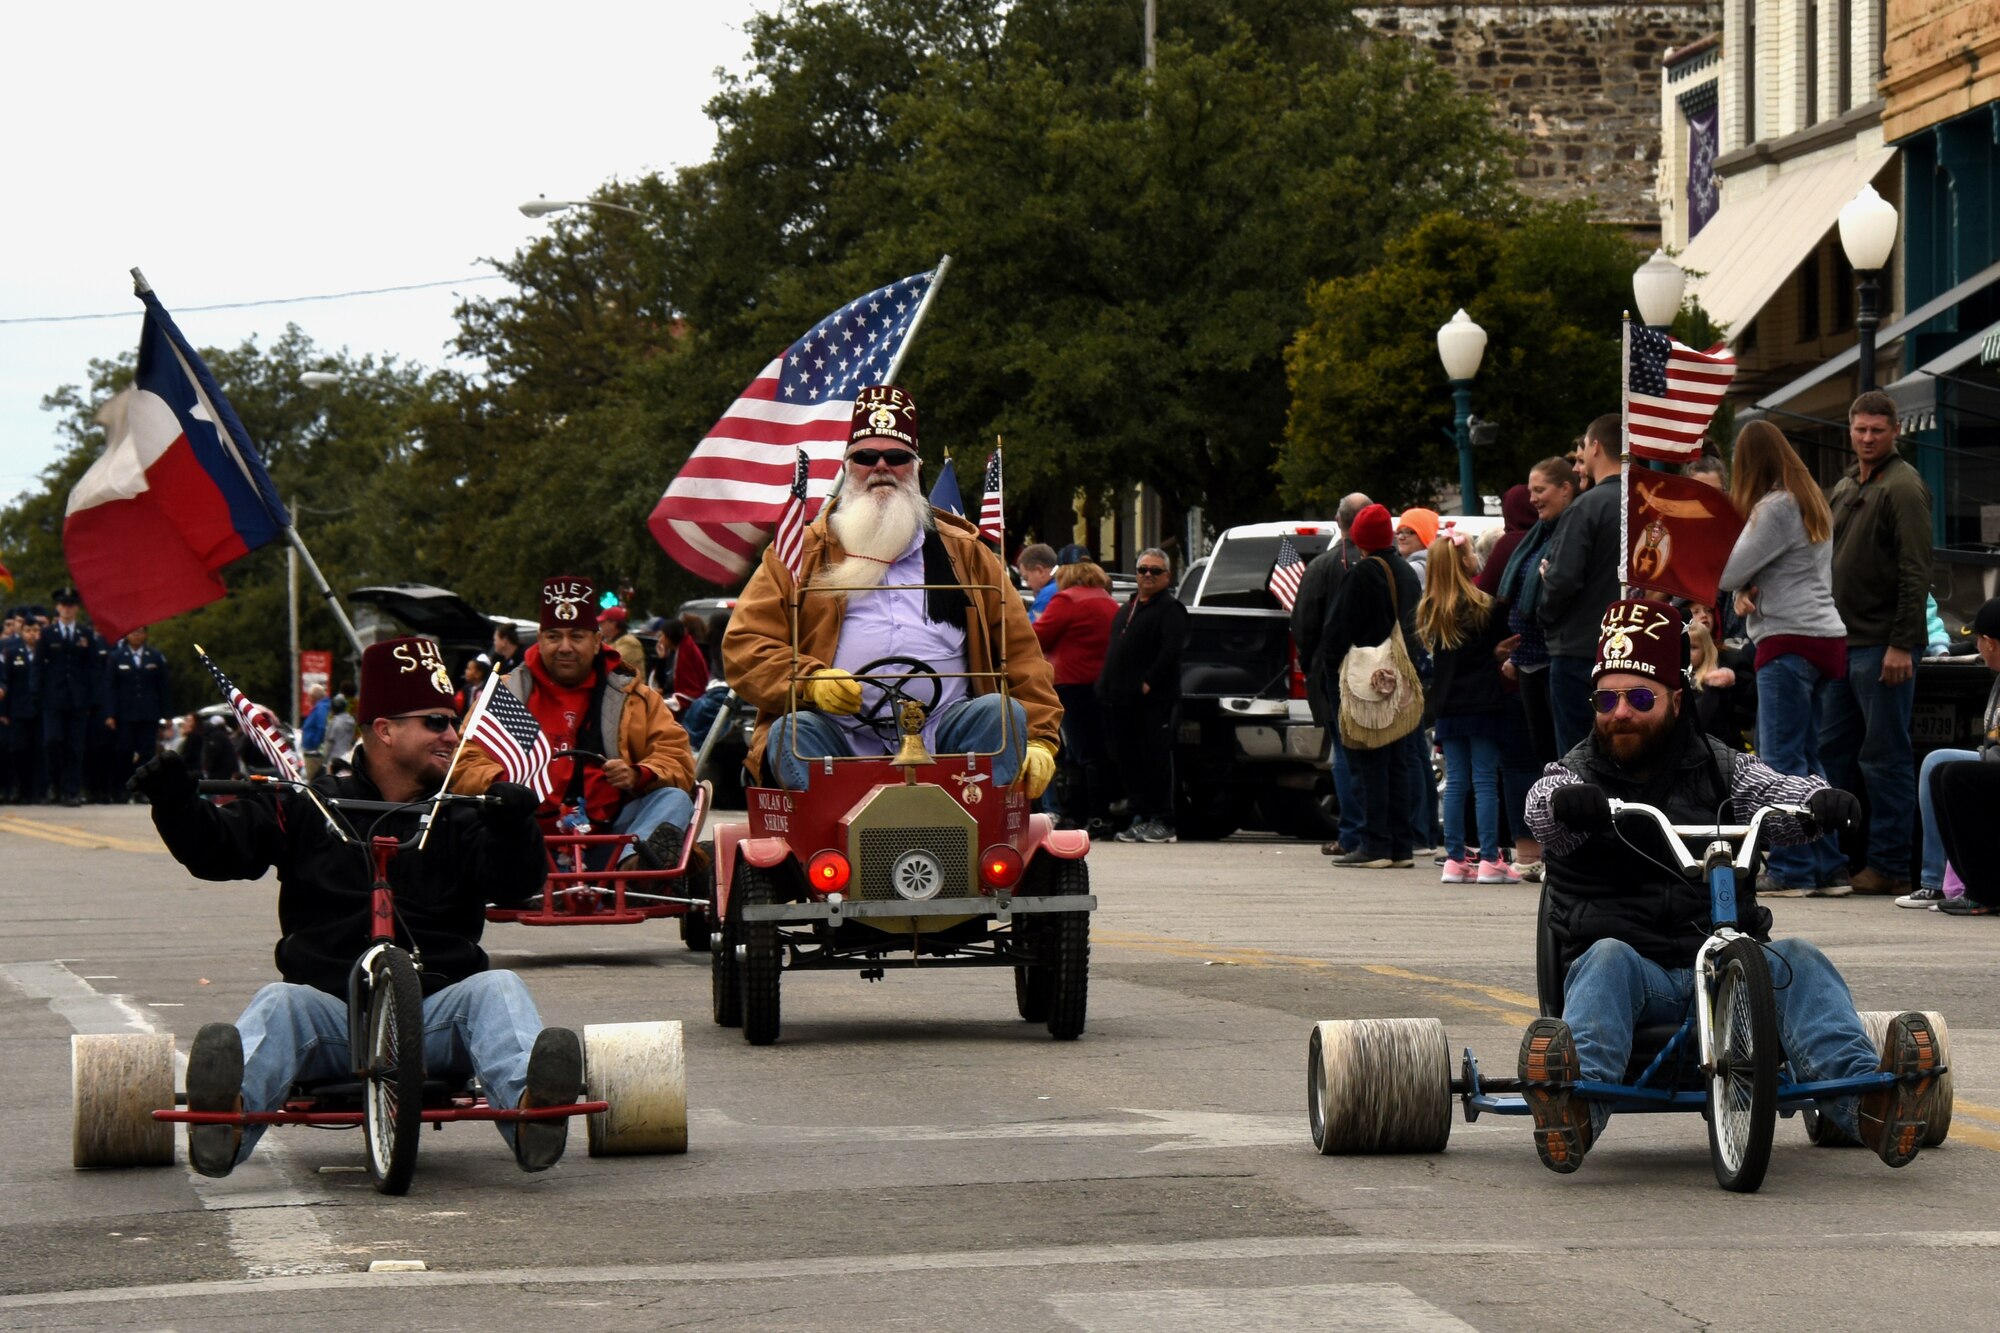 Members from the Suez Shriners, Concho Shrine Club, ride in the Veterans Day Parade in San Angelo, Texas, Nov. 10, 2018. Groups from San Angelo joined service members to show their support during the Veterans Day Parade. (U.S. Air Force photo by Airman 1st Class Zachary Chapman/Released)